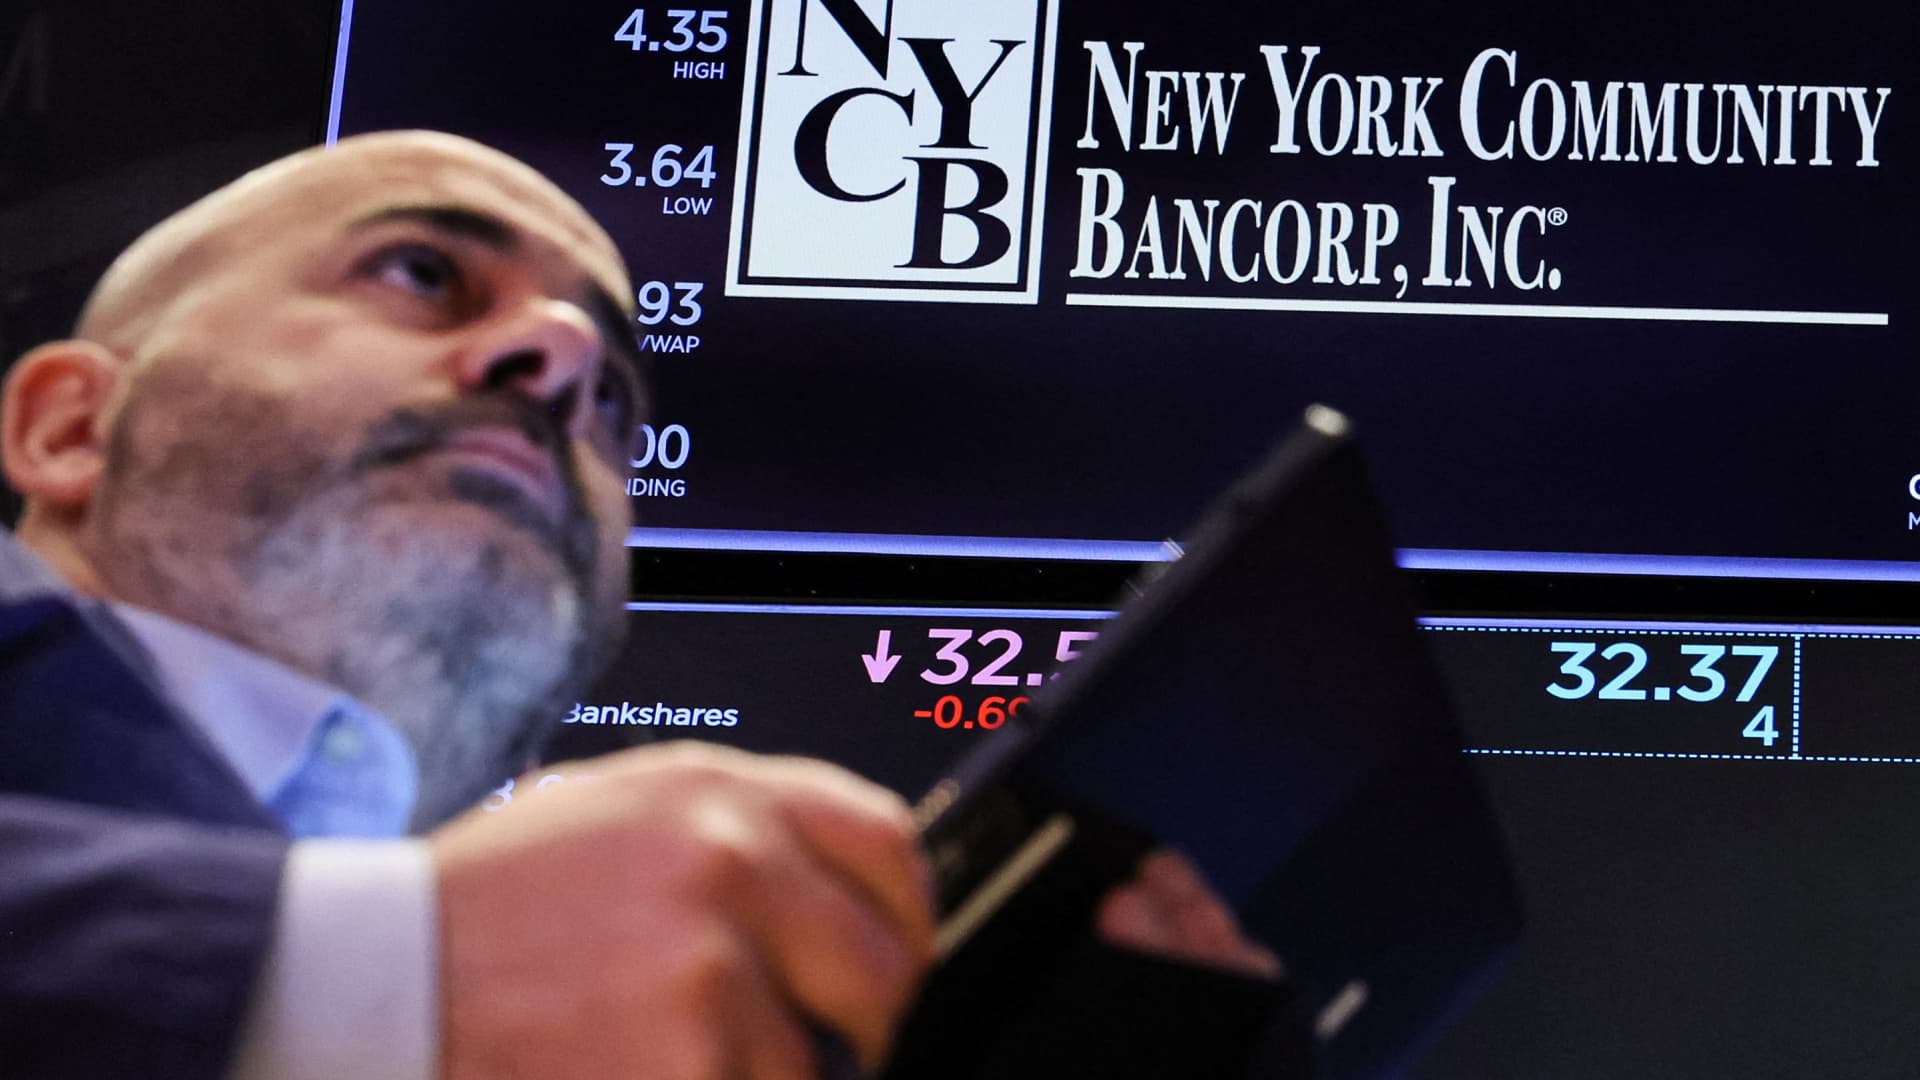 Wall Street is worried about NYCB’s loan losses and deposit levels as stock sinks below $4